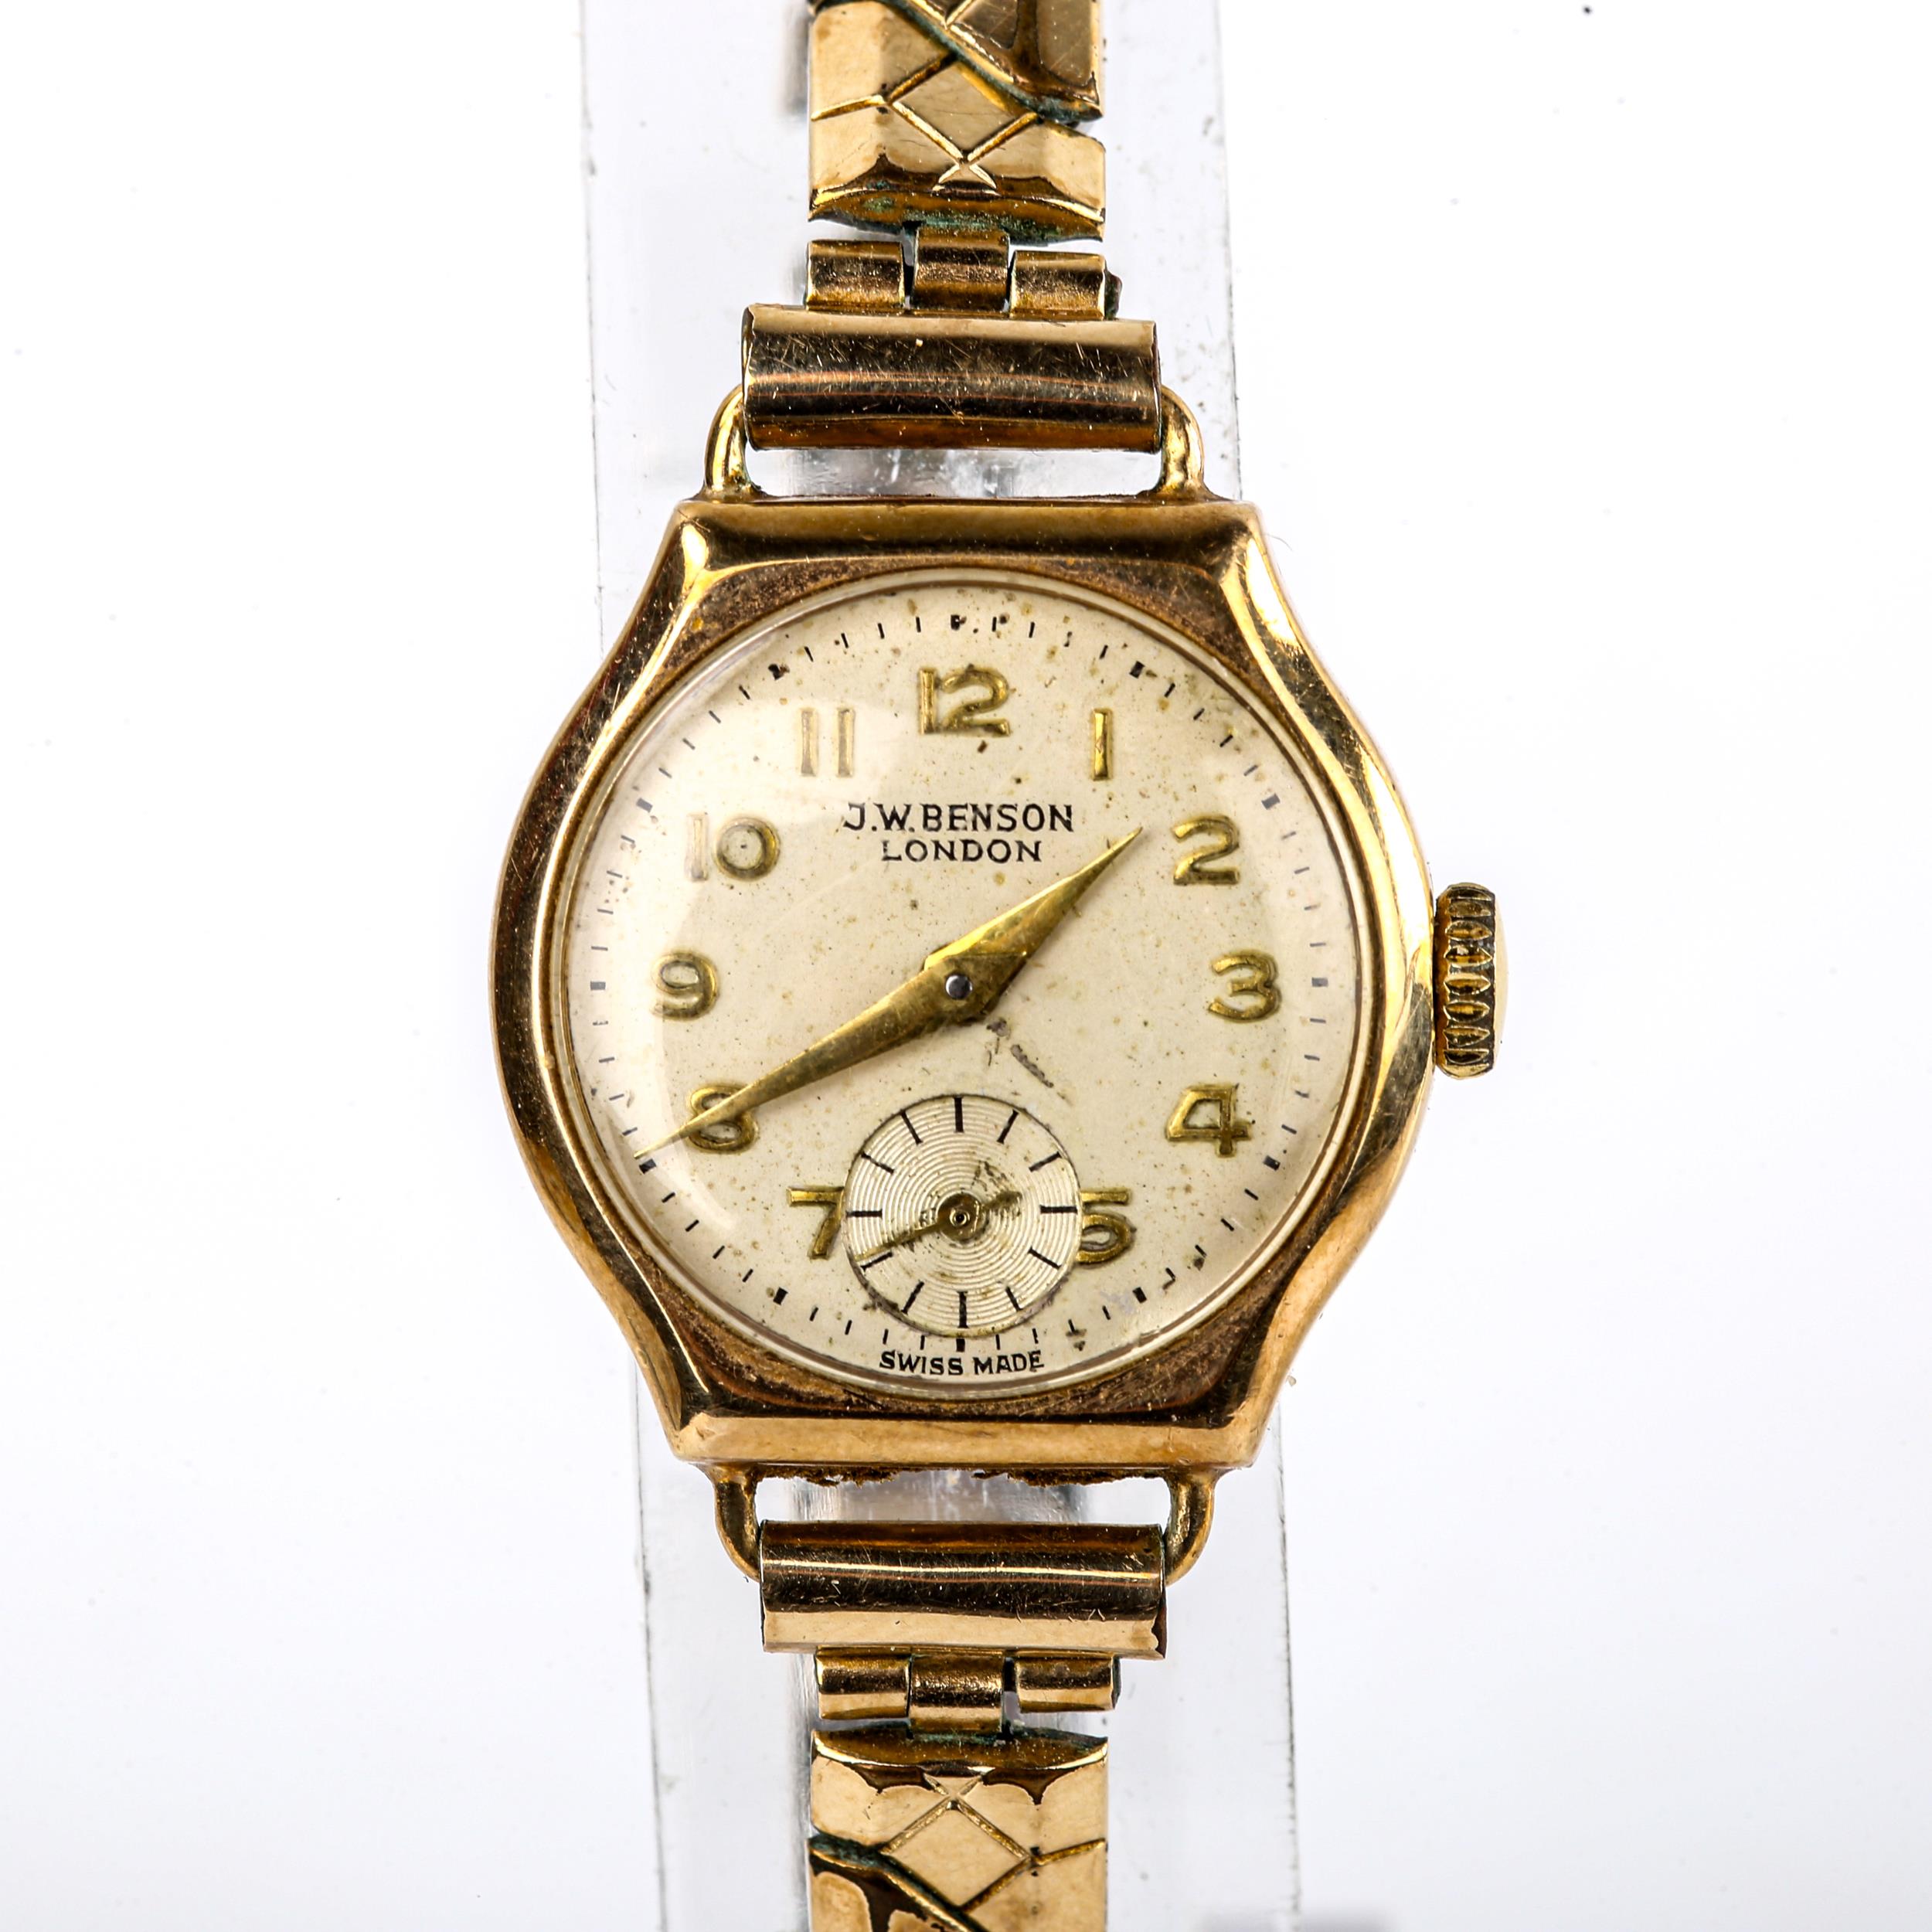 J W BENSON - a lady's Vintage 9ct gold mechanical bracelet watch, ref. 87757, silvered dial with